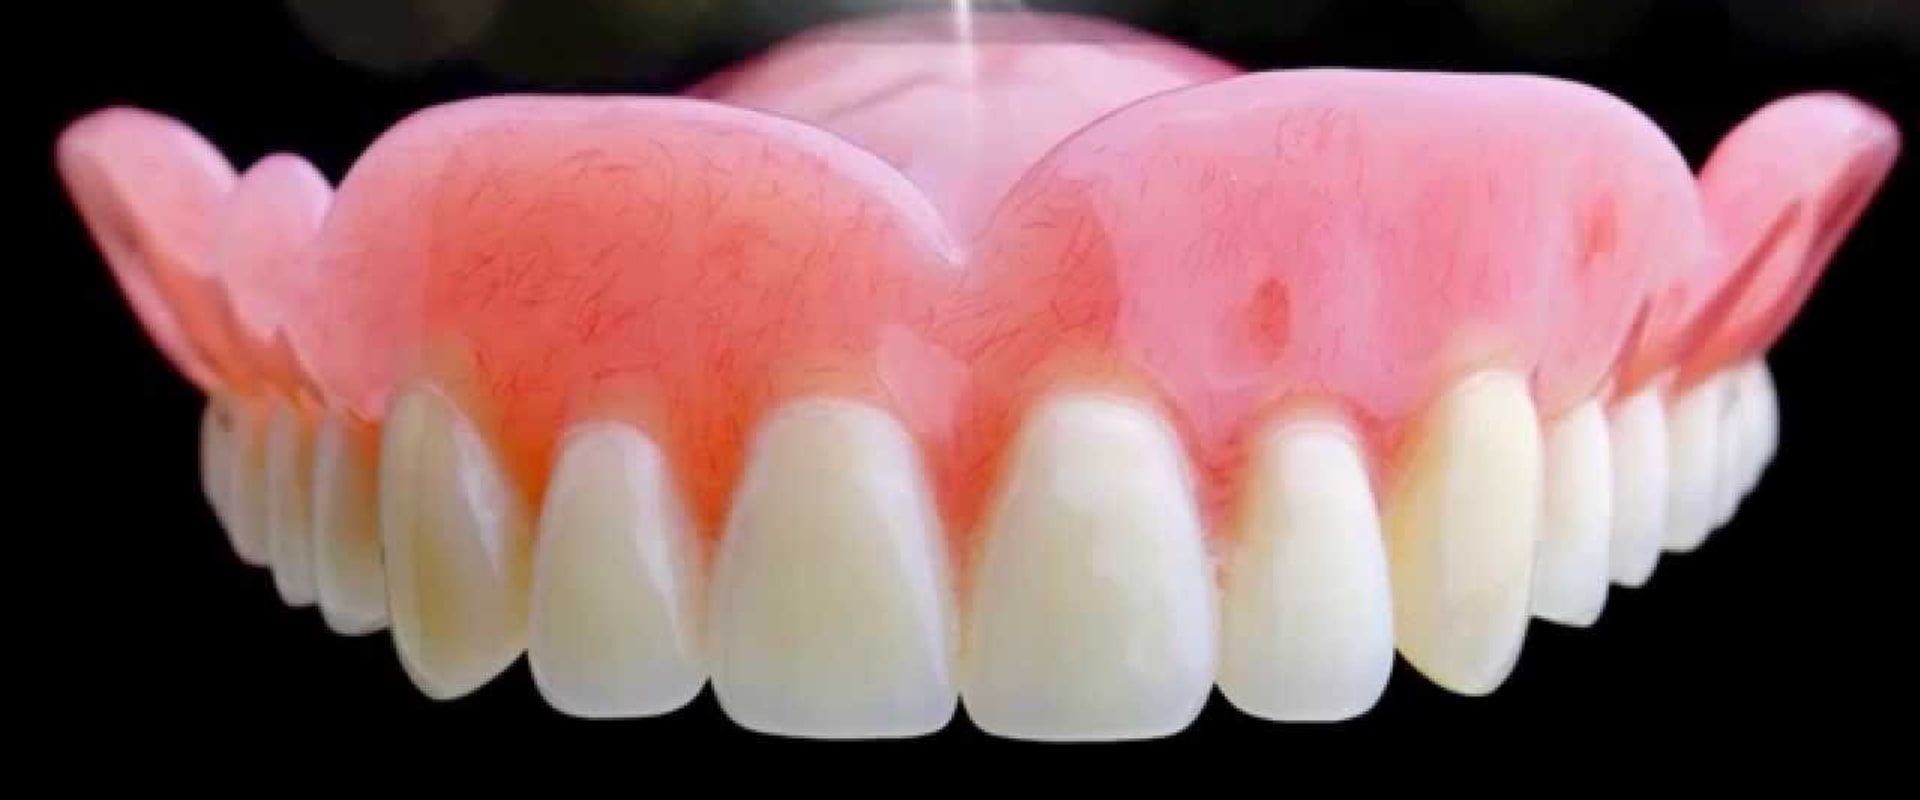 Everything You Need to Know About Dentures and Partial Dentures